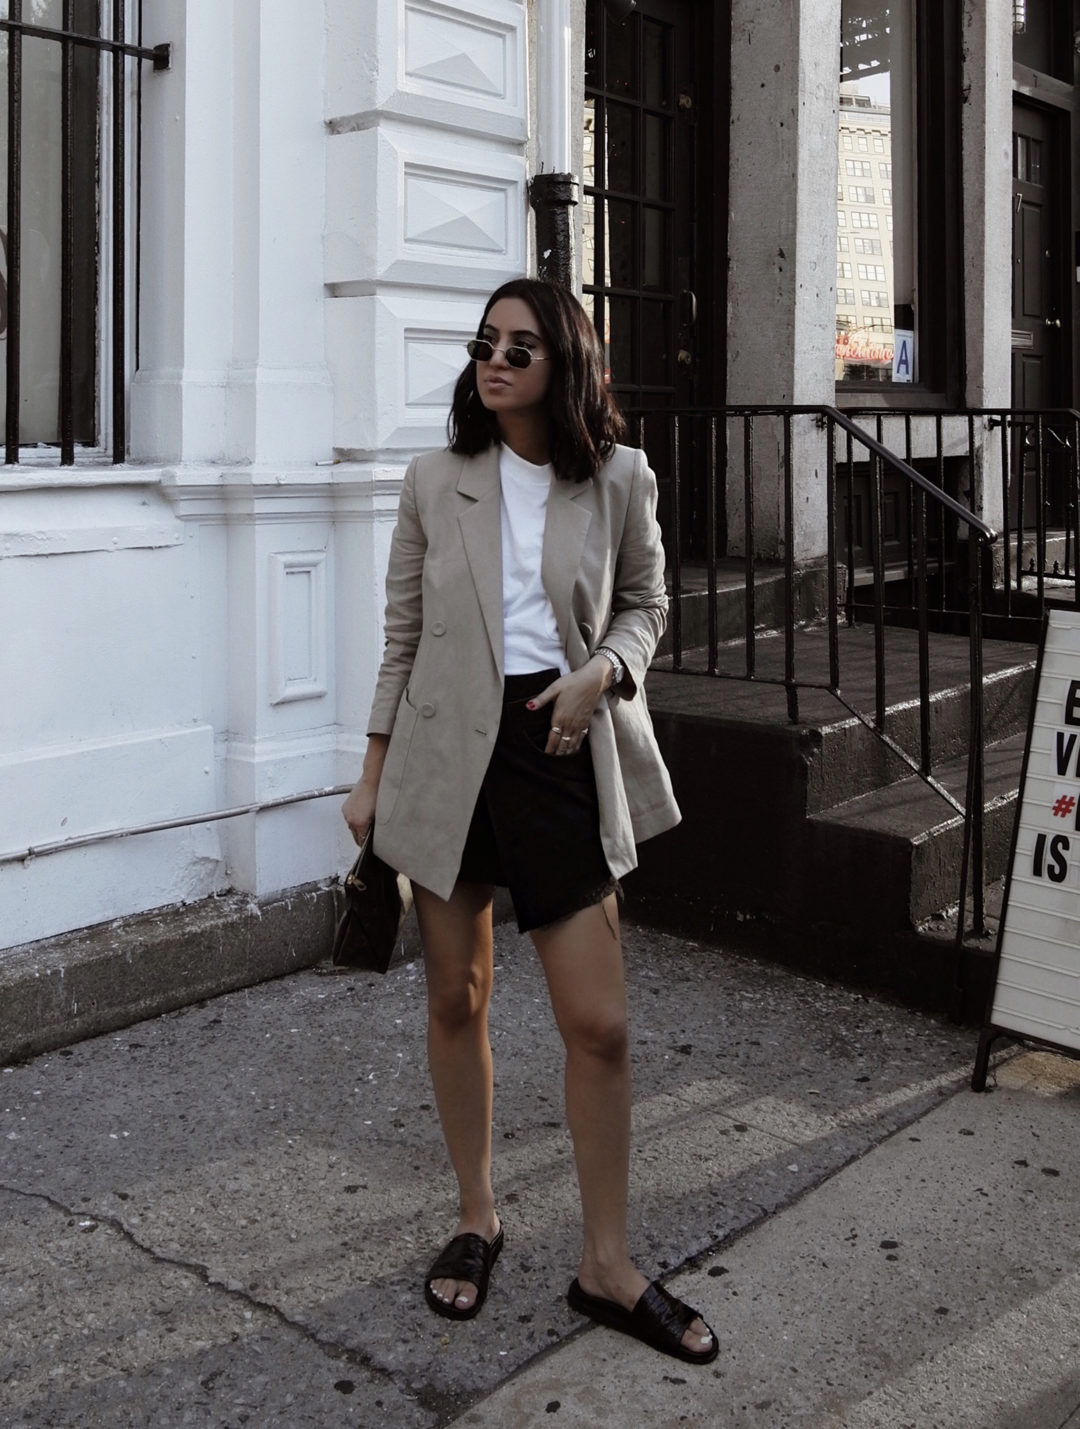 HOW TO WEAR LIGHT LAYERS FOR FALL - Tania Sarin